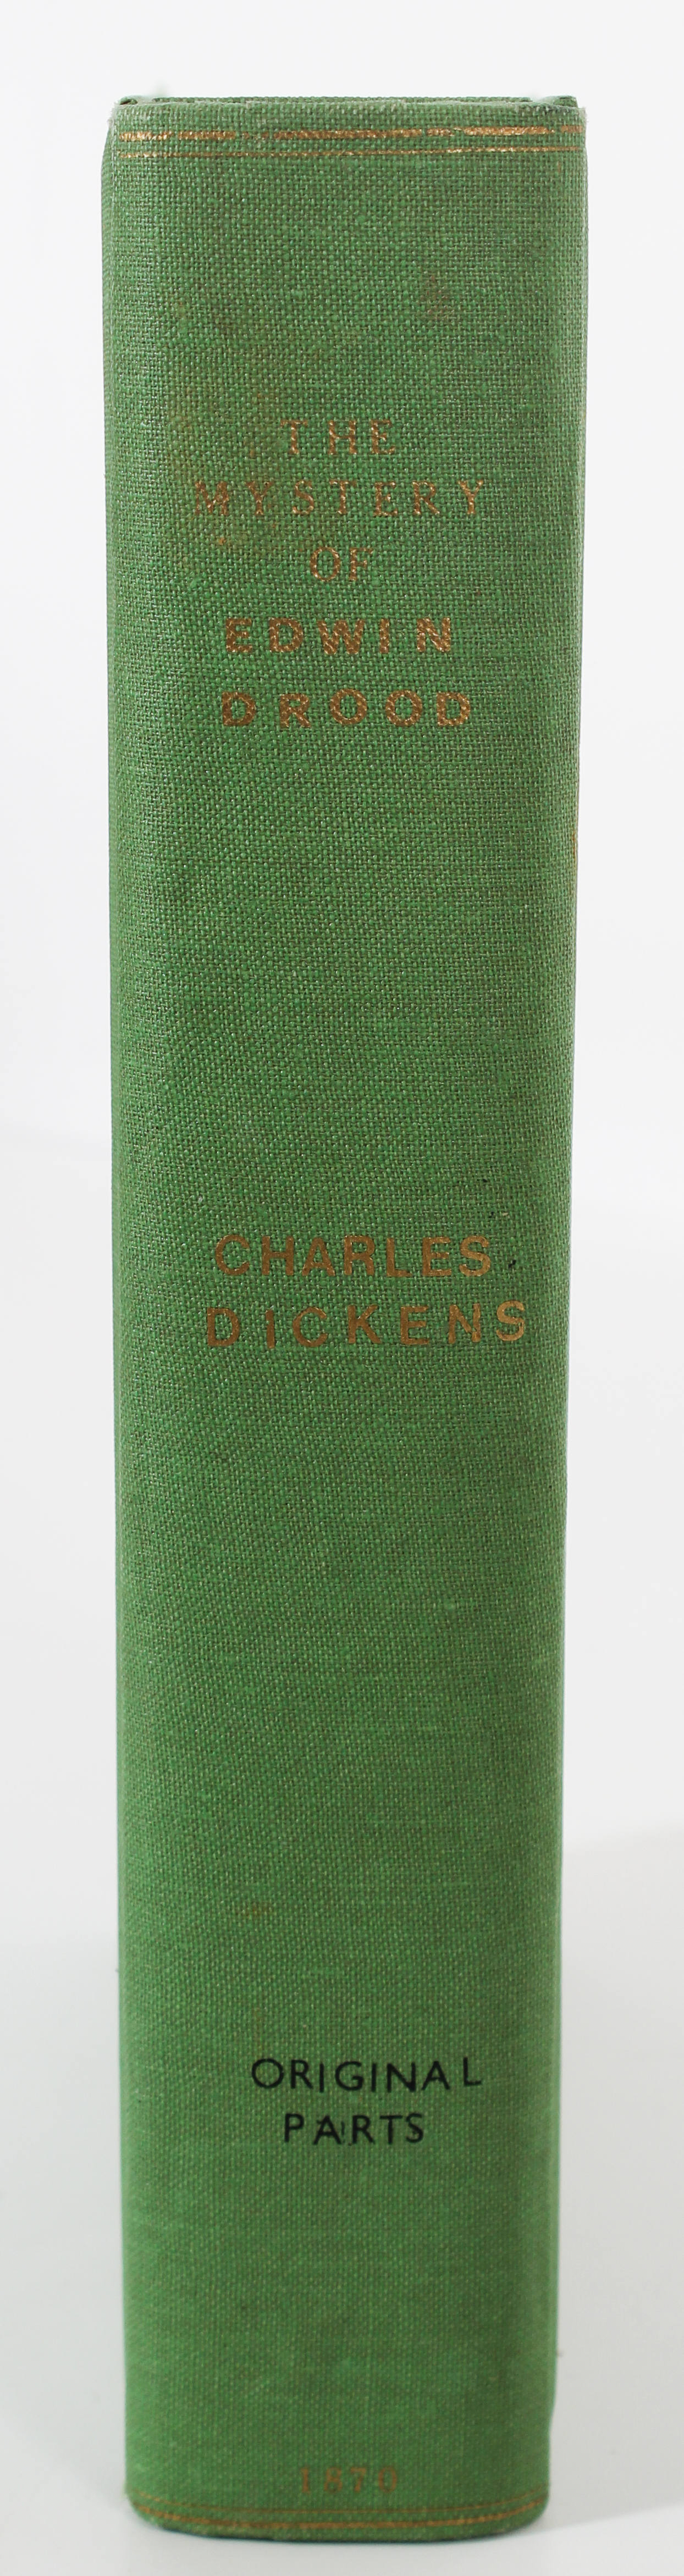 Dickens, The Mystery of Edwin Drood Original Parts